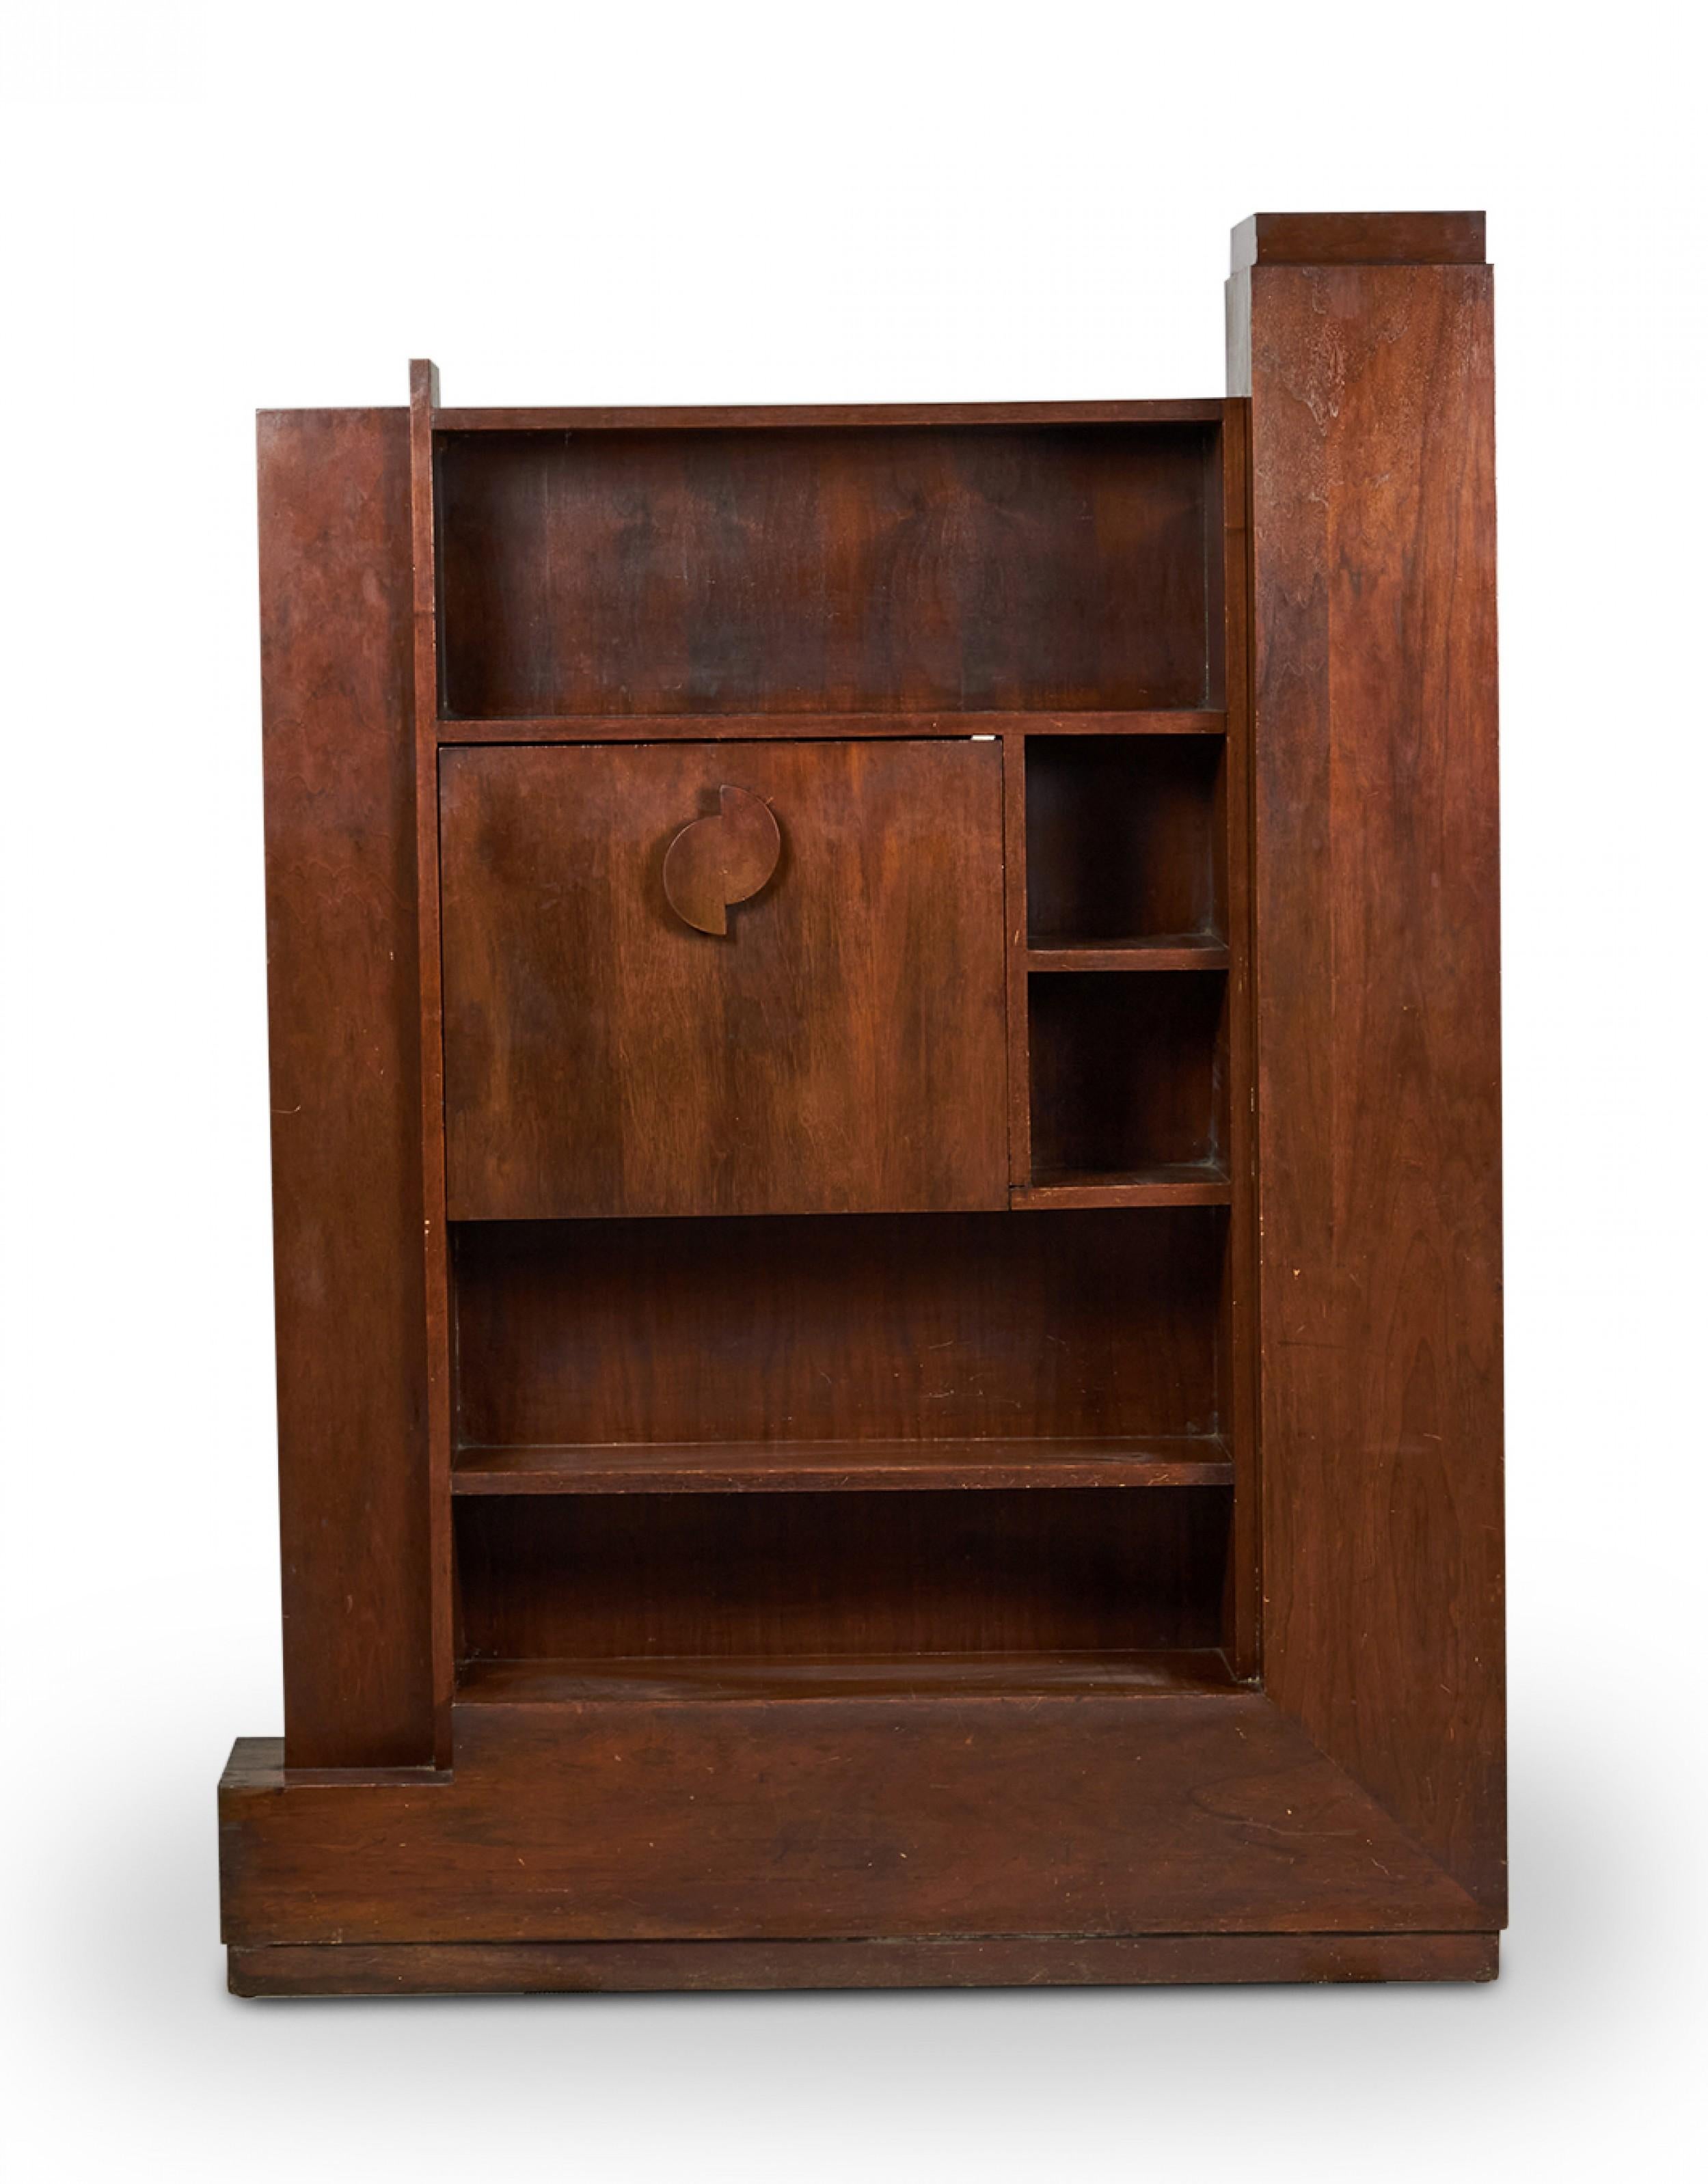 American mid-century walnut fall-front skyscraper desk with a main multi-shelved cabinet flanked on either side by additional shelving units with a central panel that falls forward to create a desktop. (PAUL FRANKL).